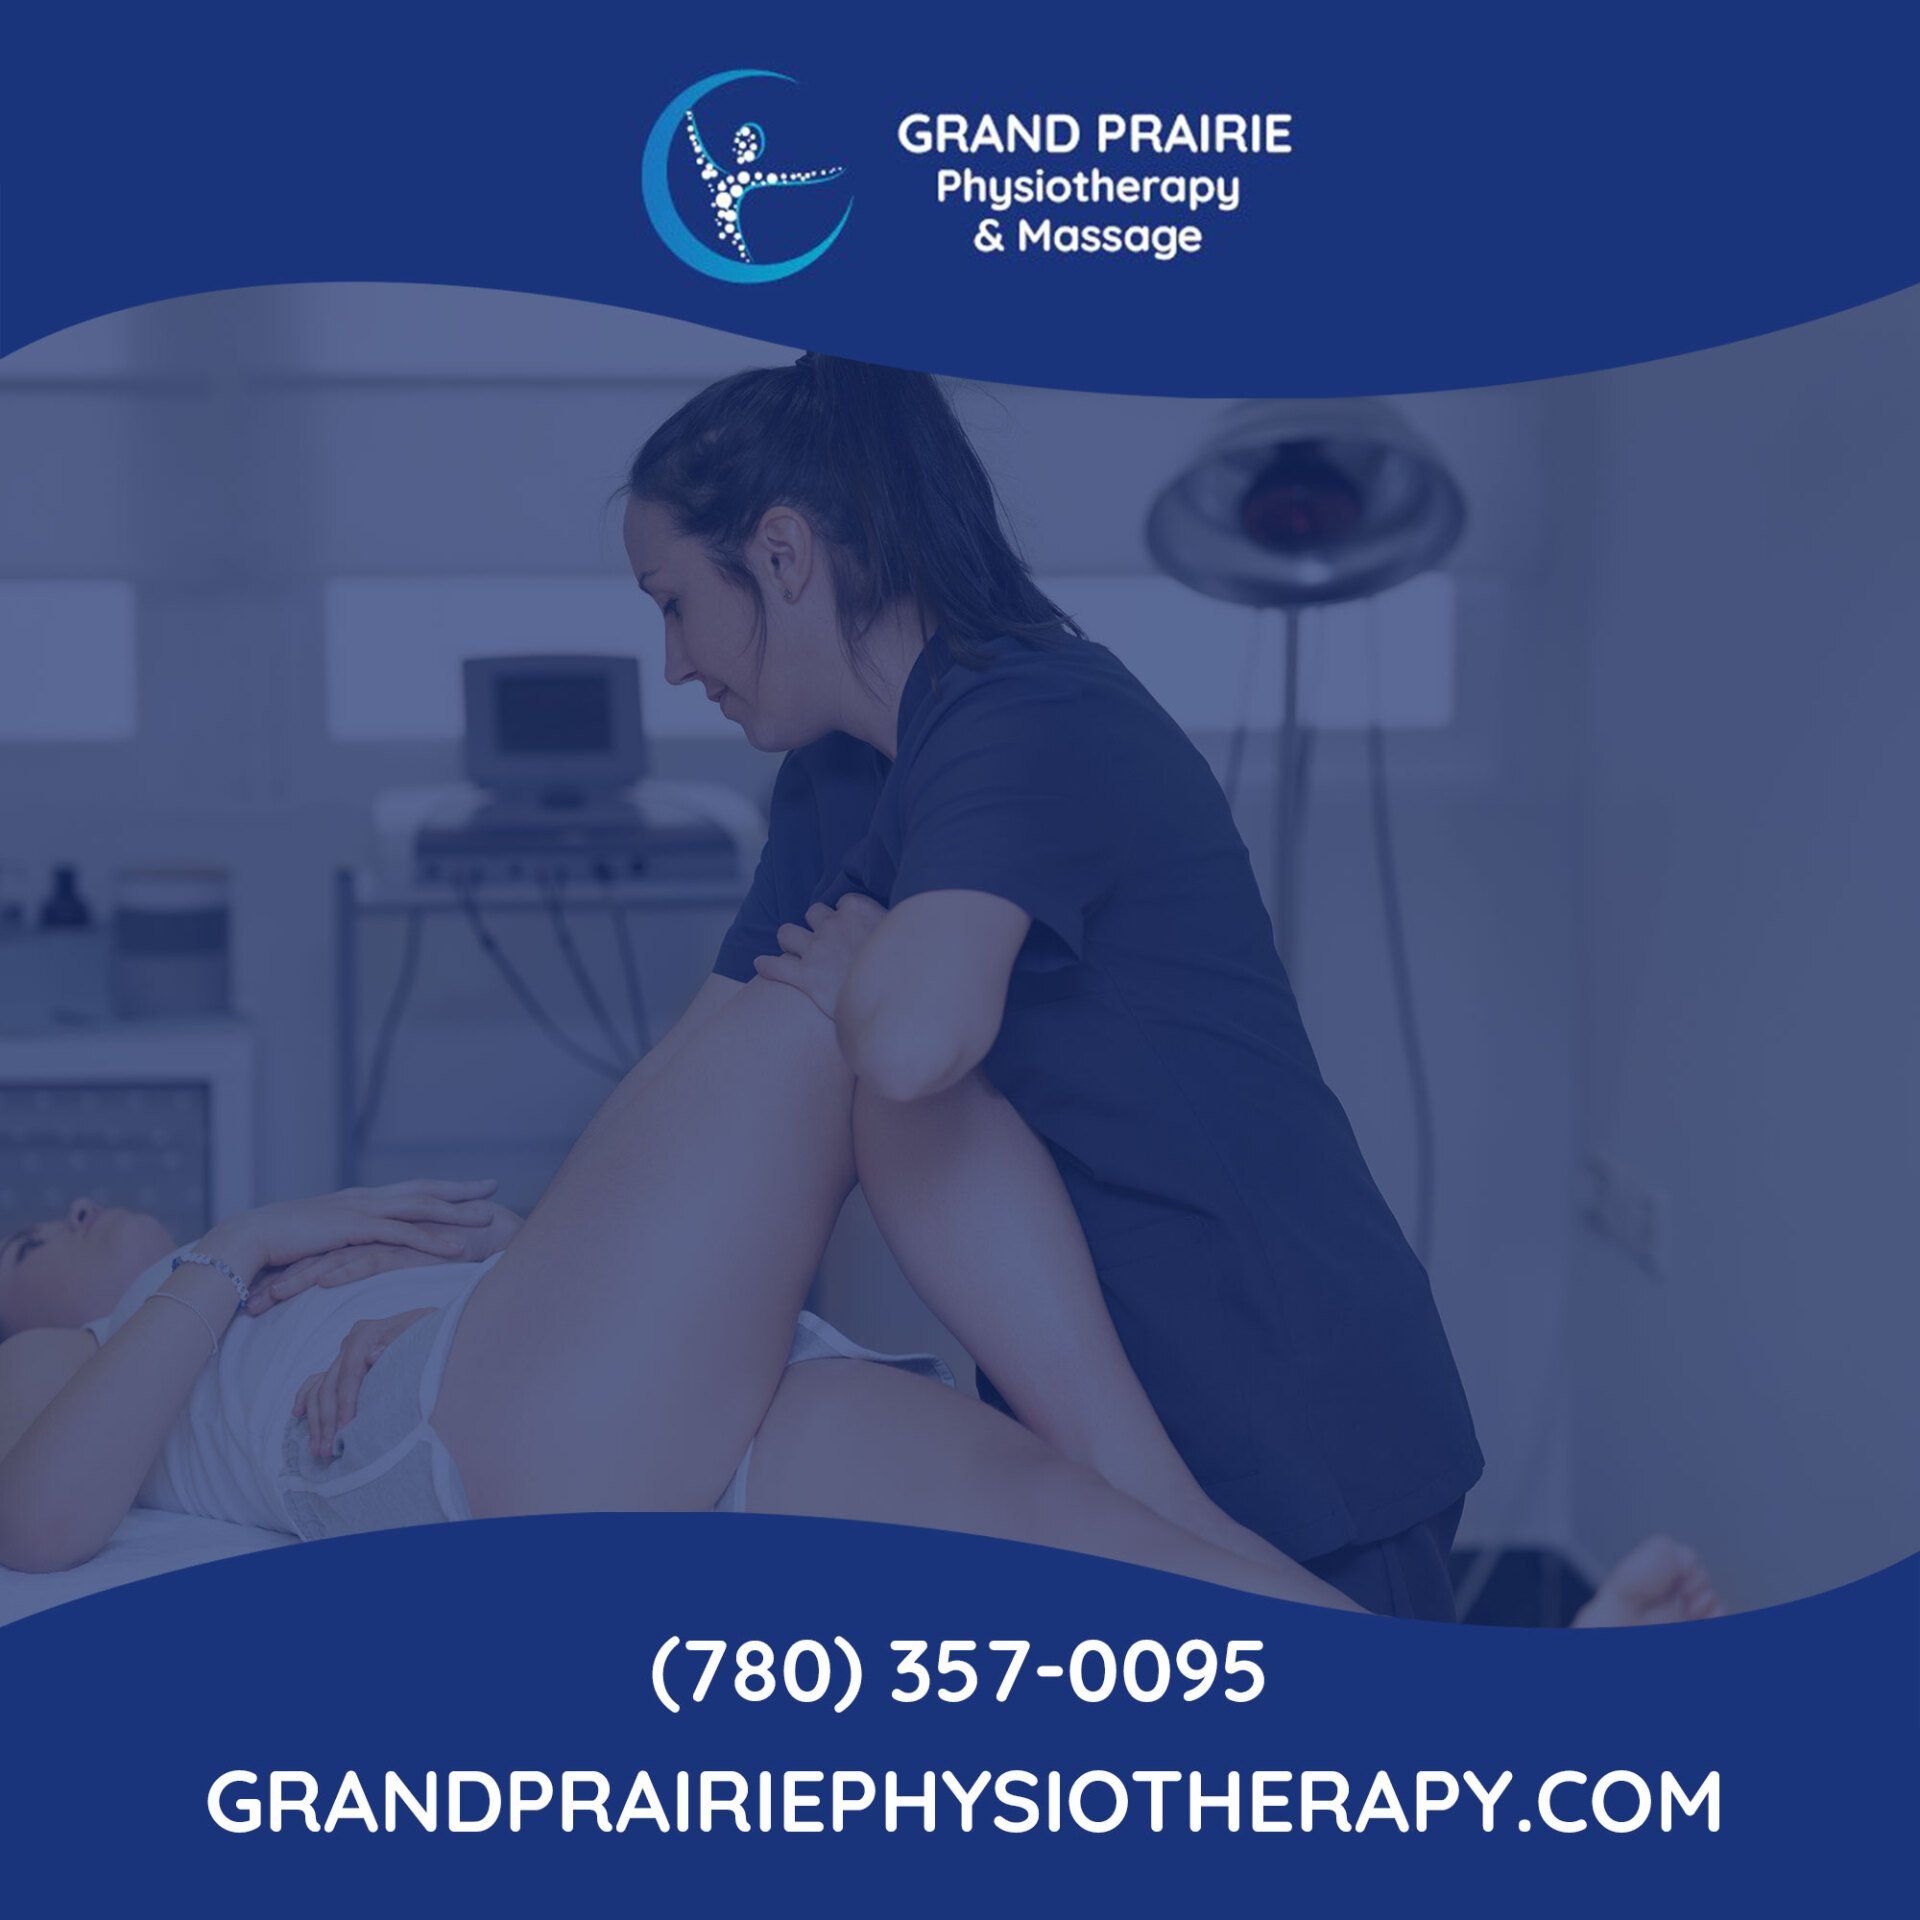 Contact Grande Prairie Physiotherapy And Massage Massage Therapist